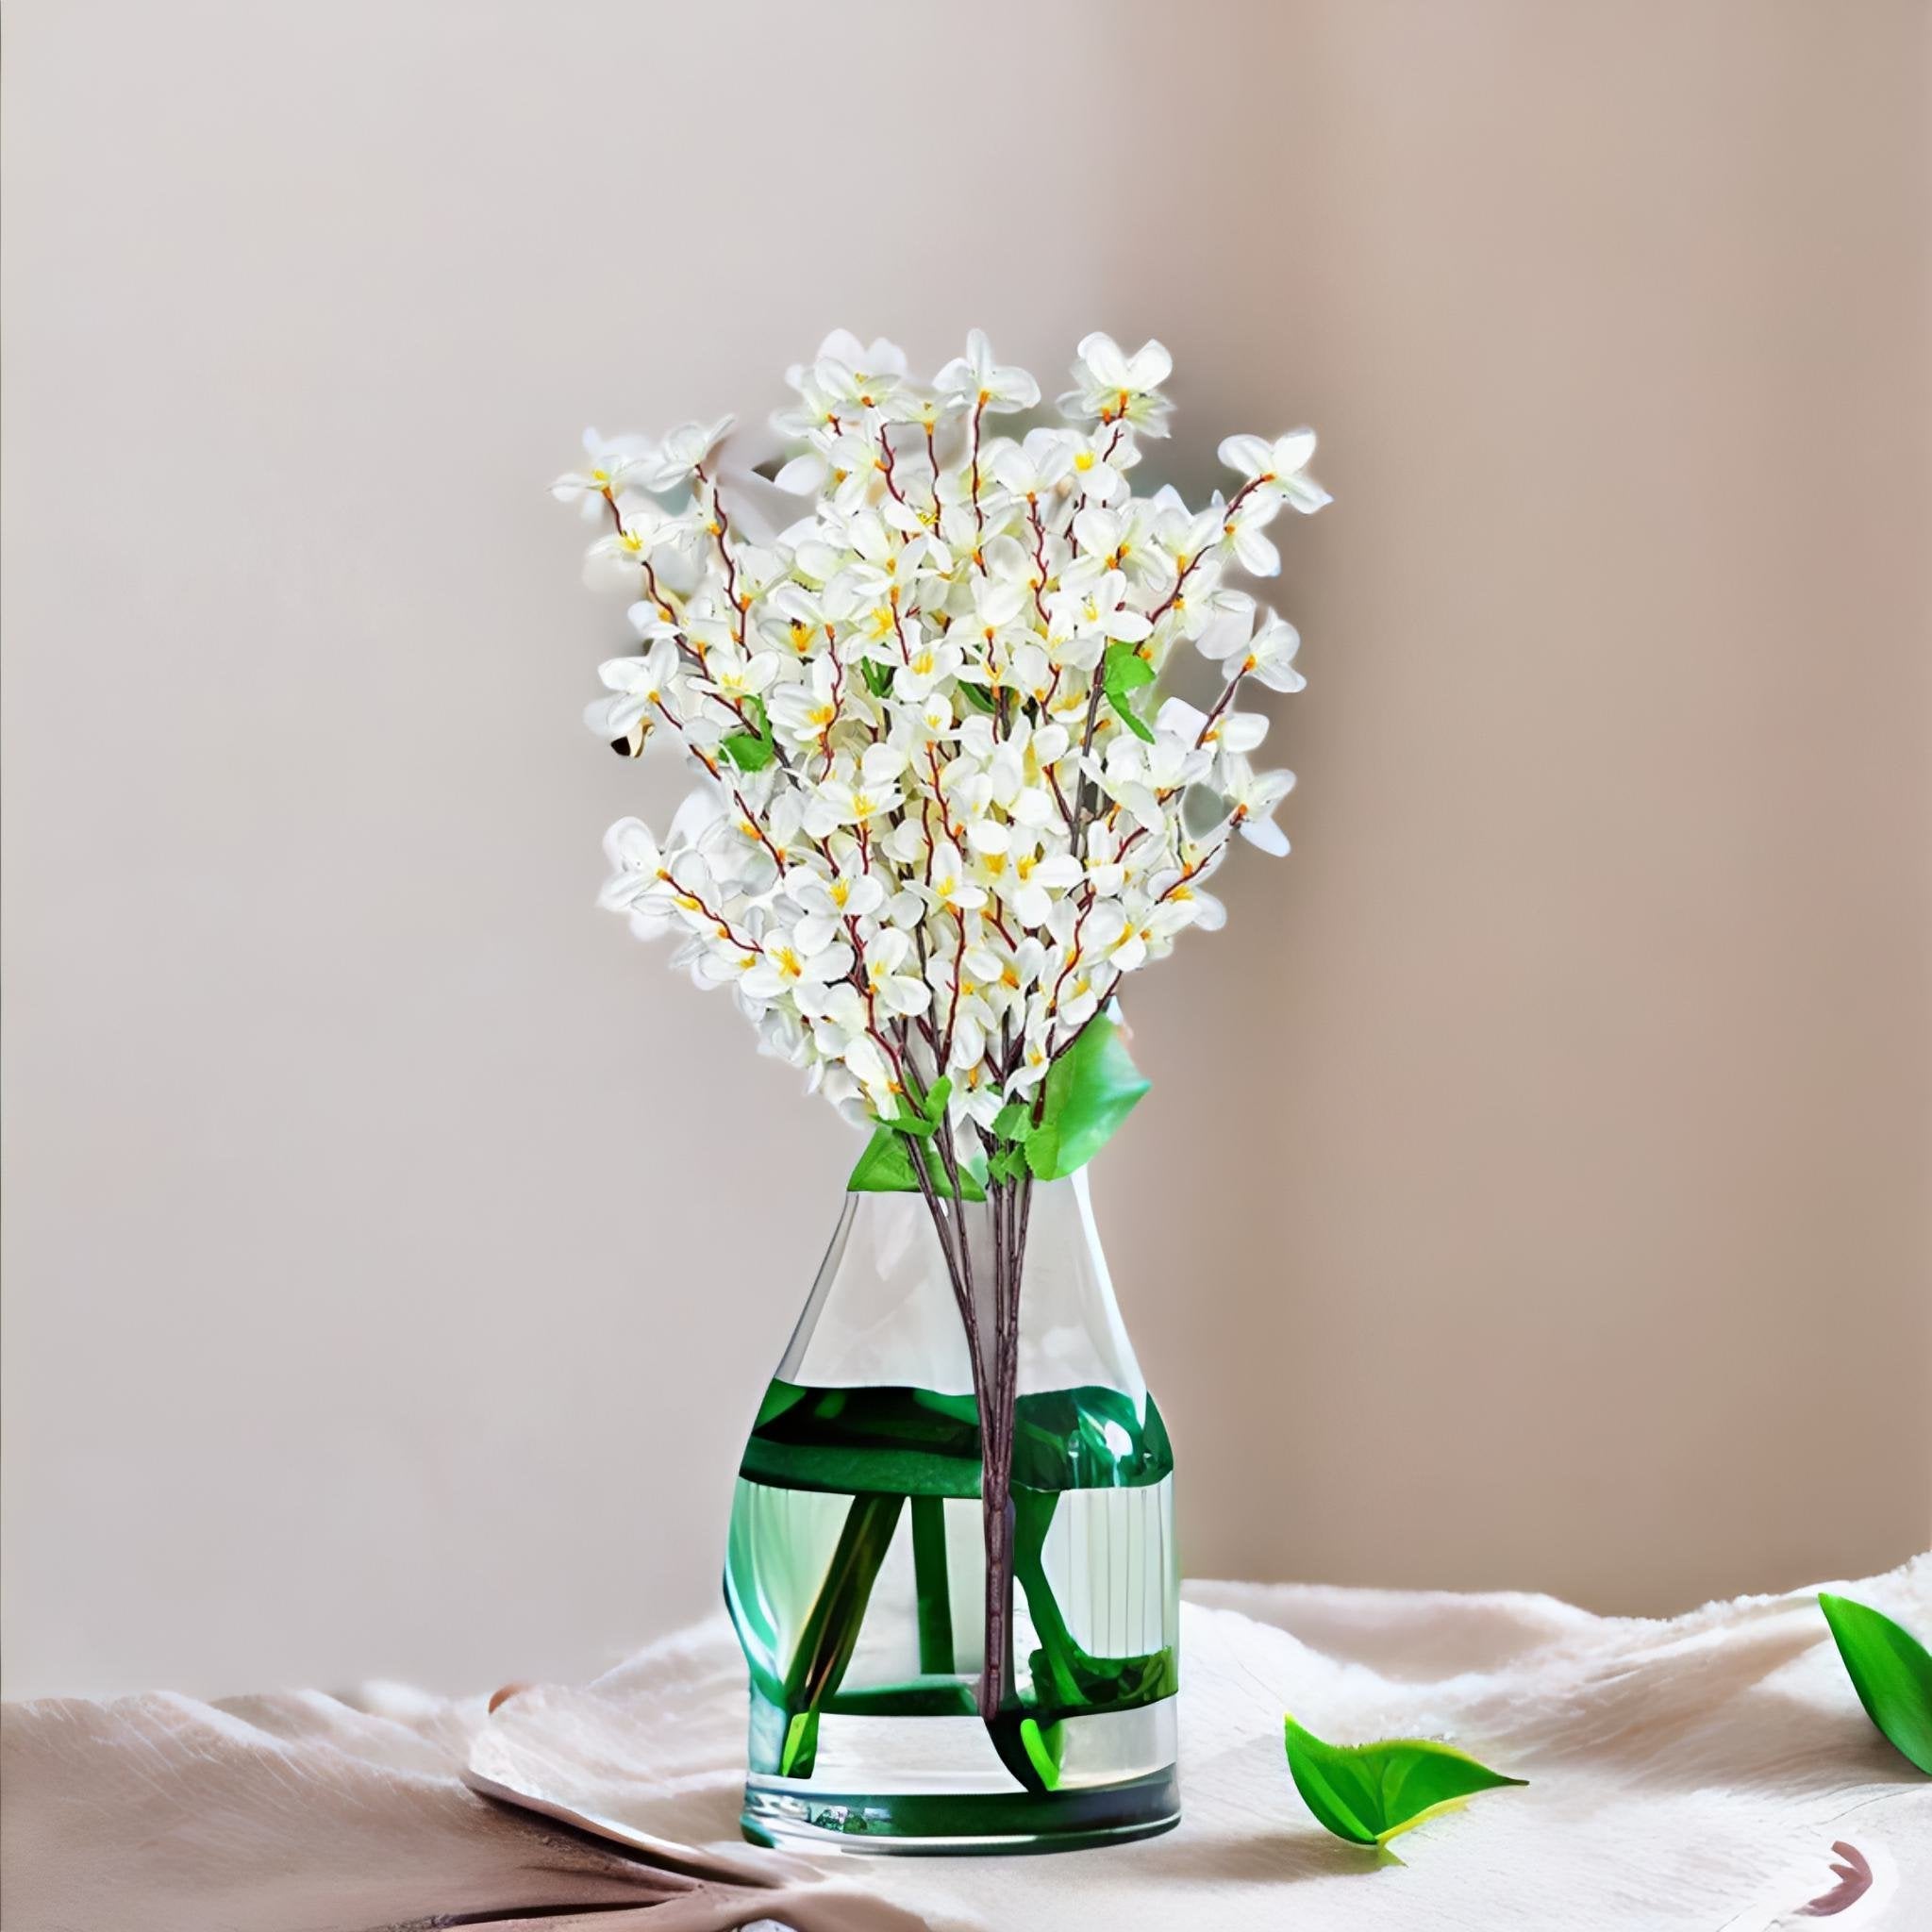 Hyacinth Artificial Flower Bunch (White)